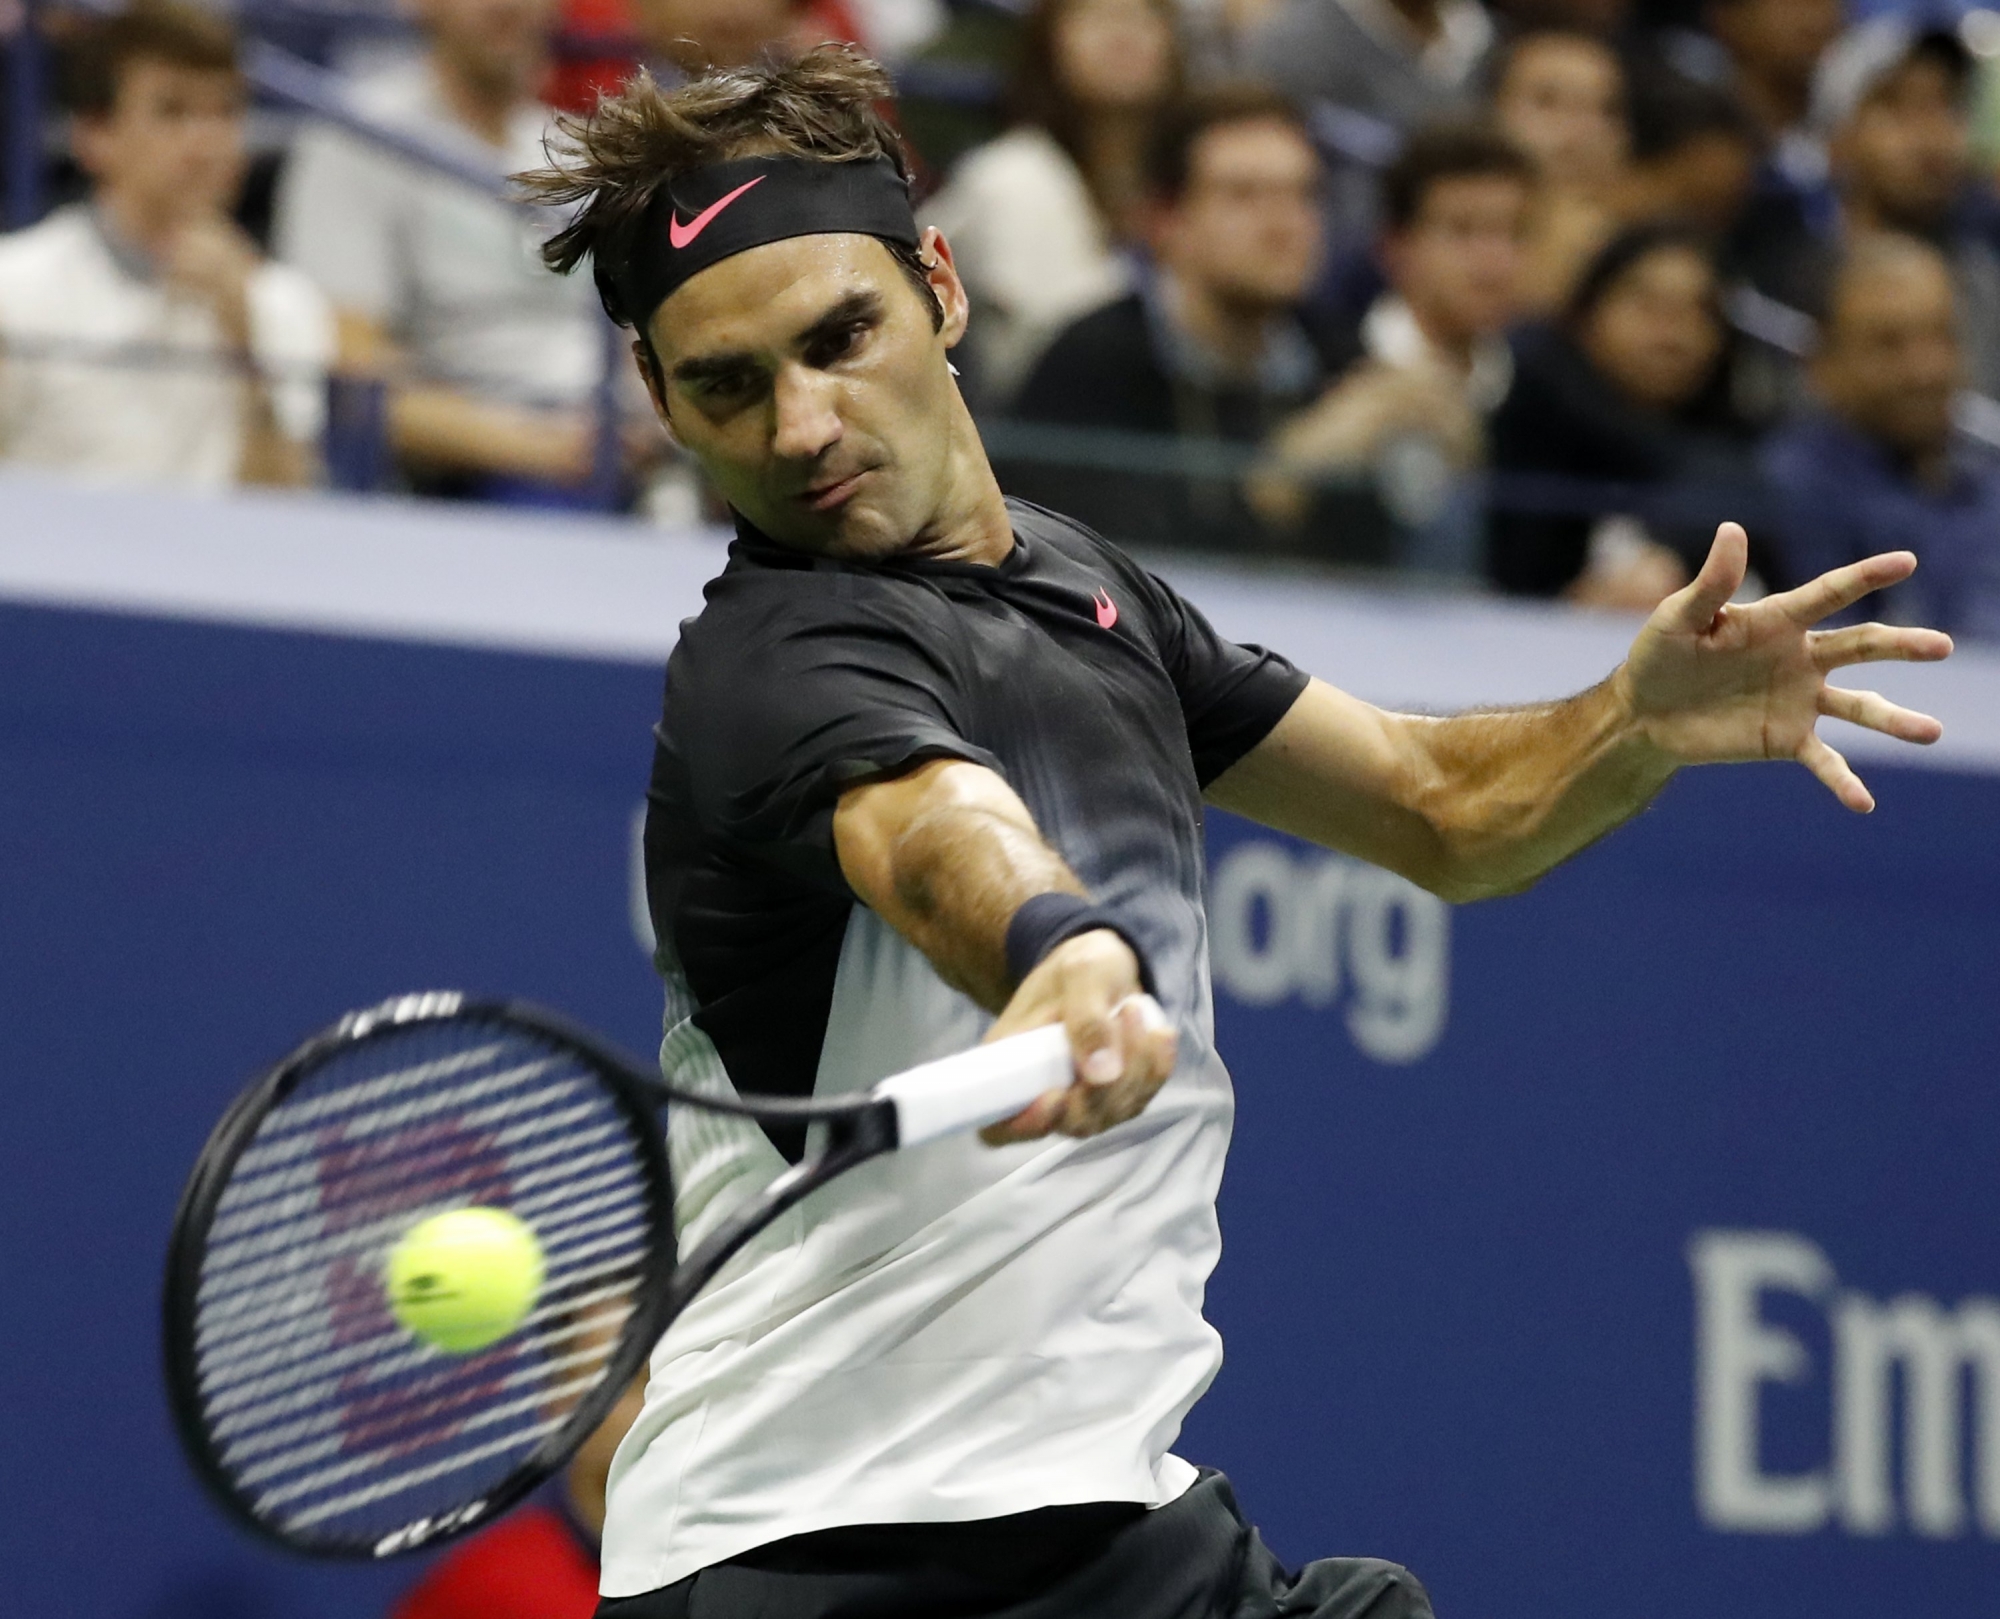 epa06180375 Roger Federer of Switzerland hits a return to Feliciano Lopez of Spain on the six day of the US Open Tennis Championships at the USTA National Tennis Center in Flushing Meadows, New York, USA, 02 September 2017. The US Open runs through 10 September.  EPA/JASON SZENES